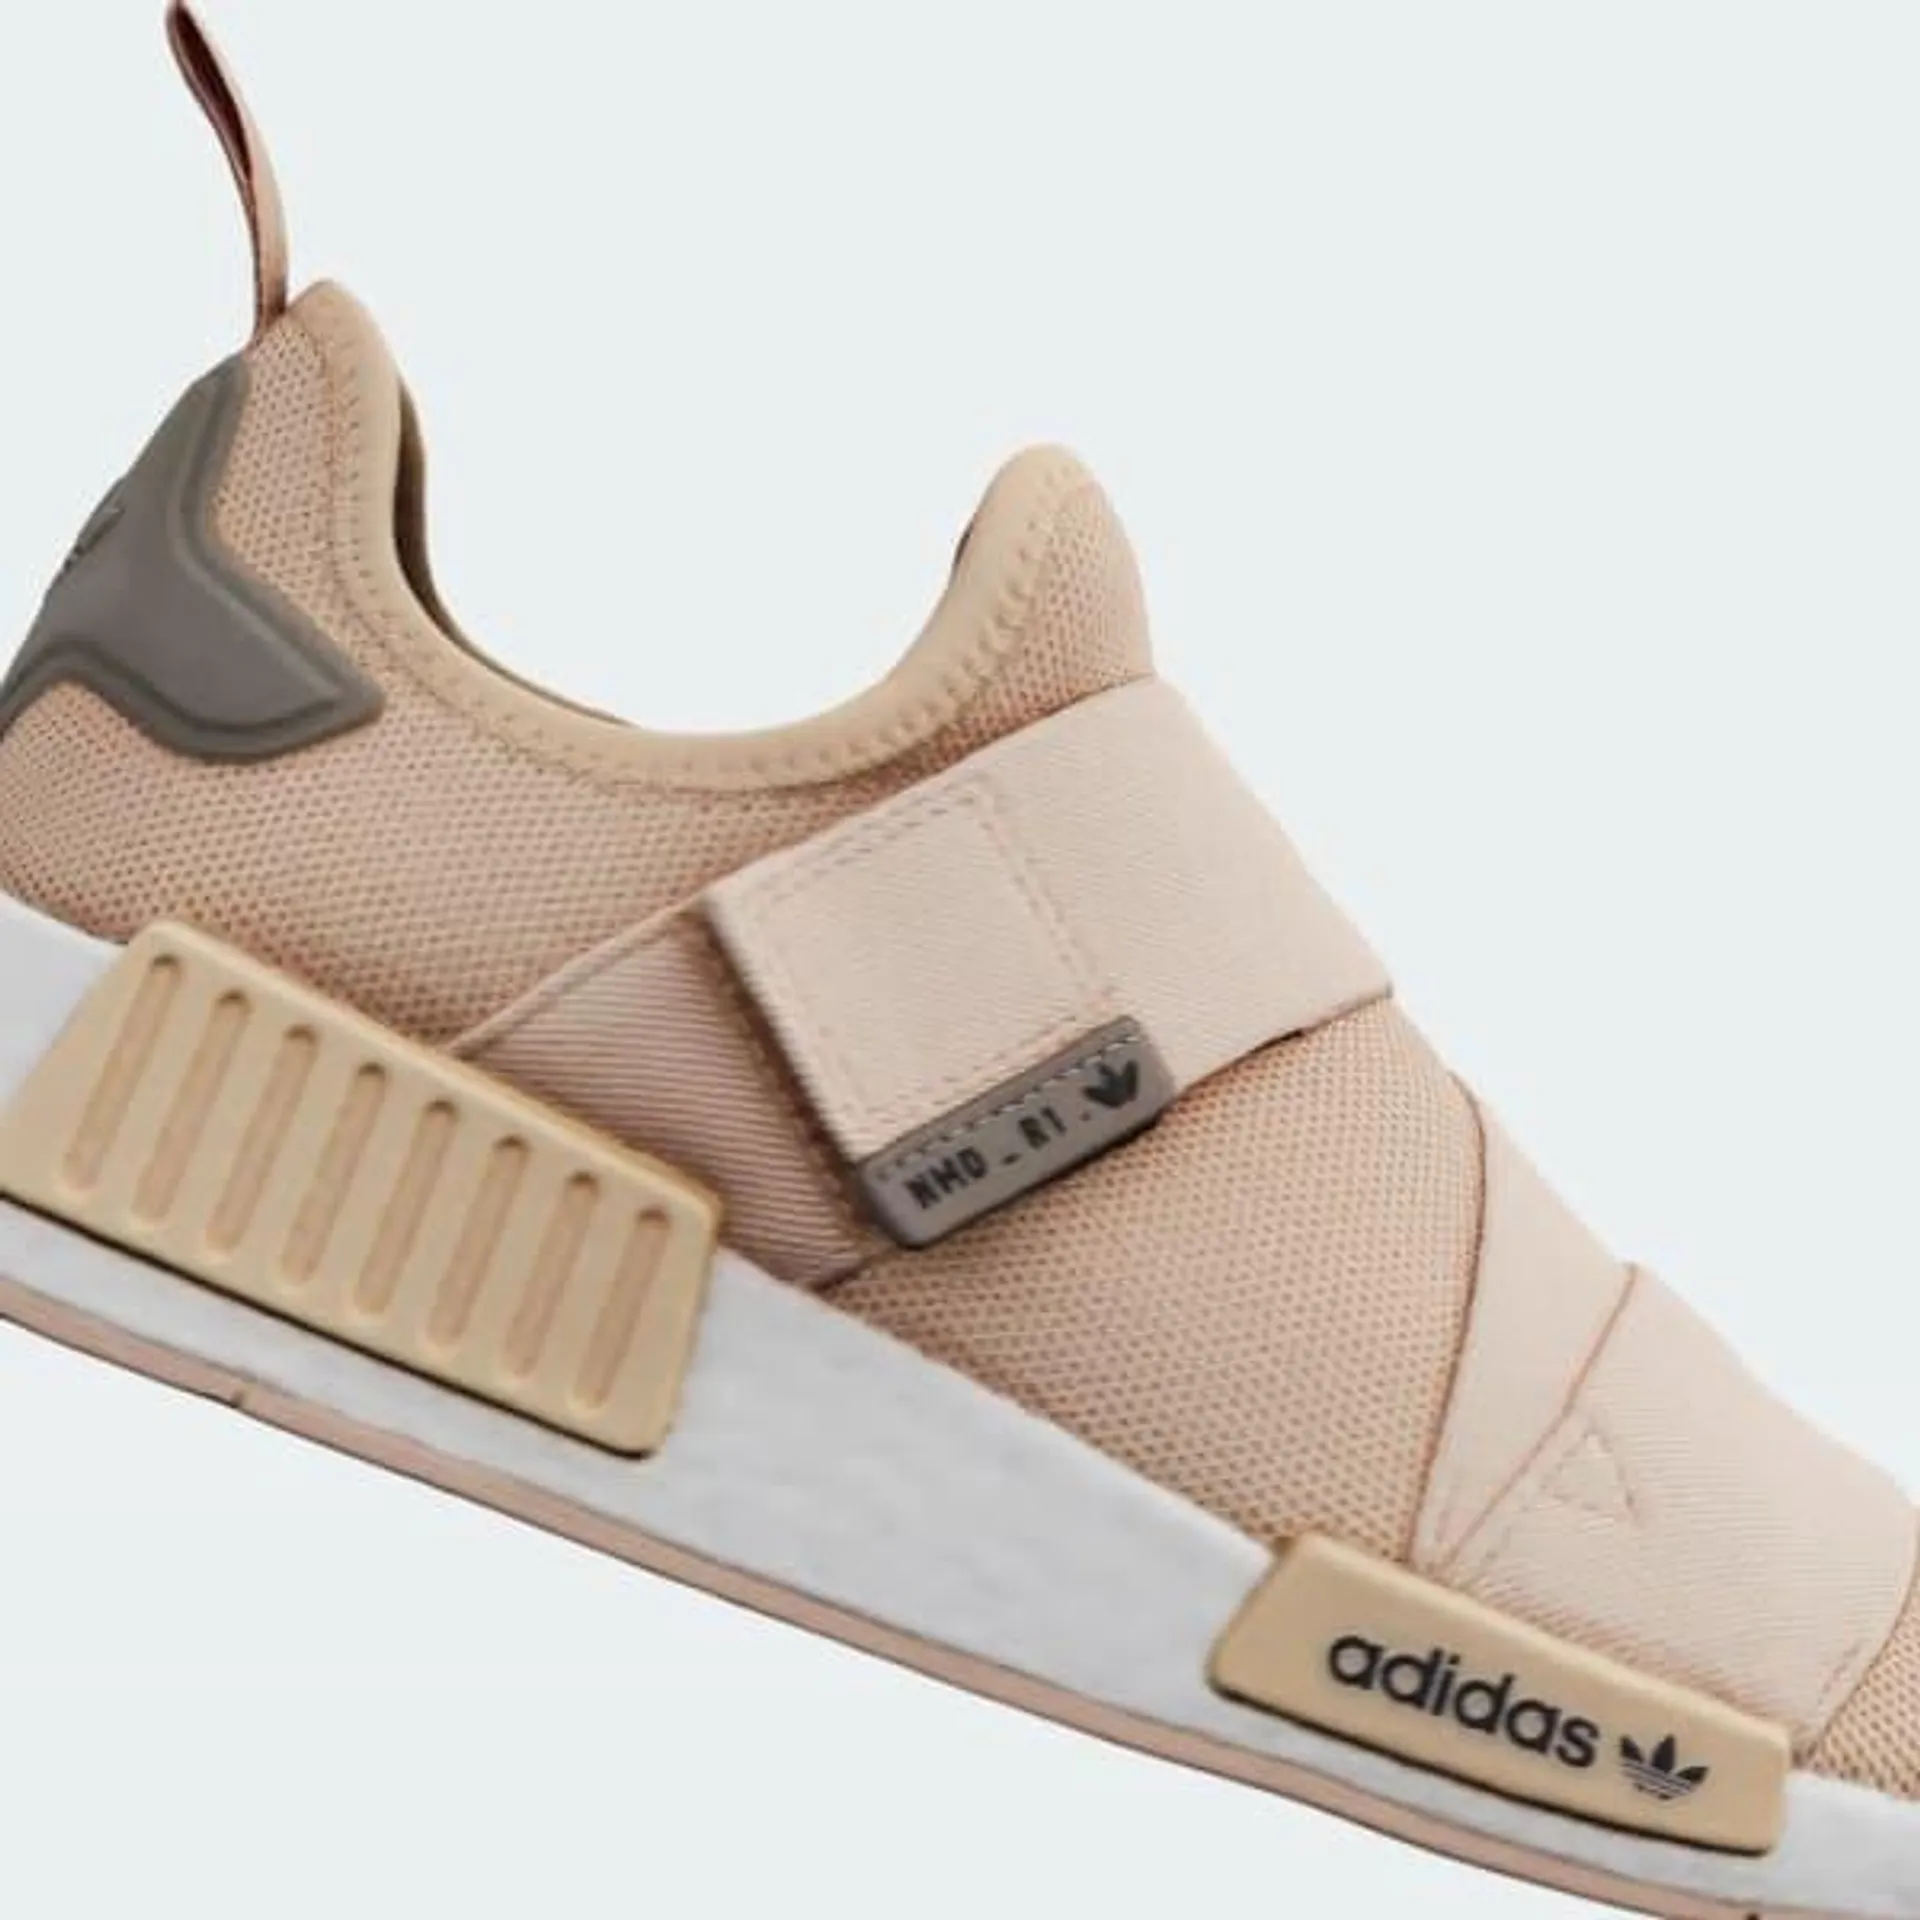 Chaussure NMD_R1 Strap